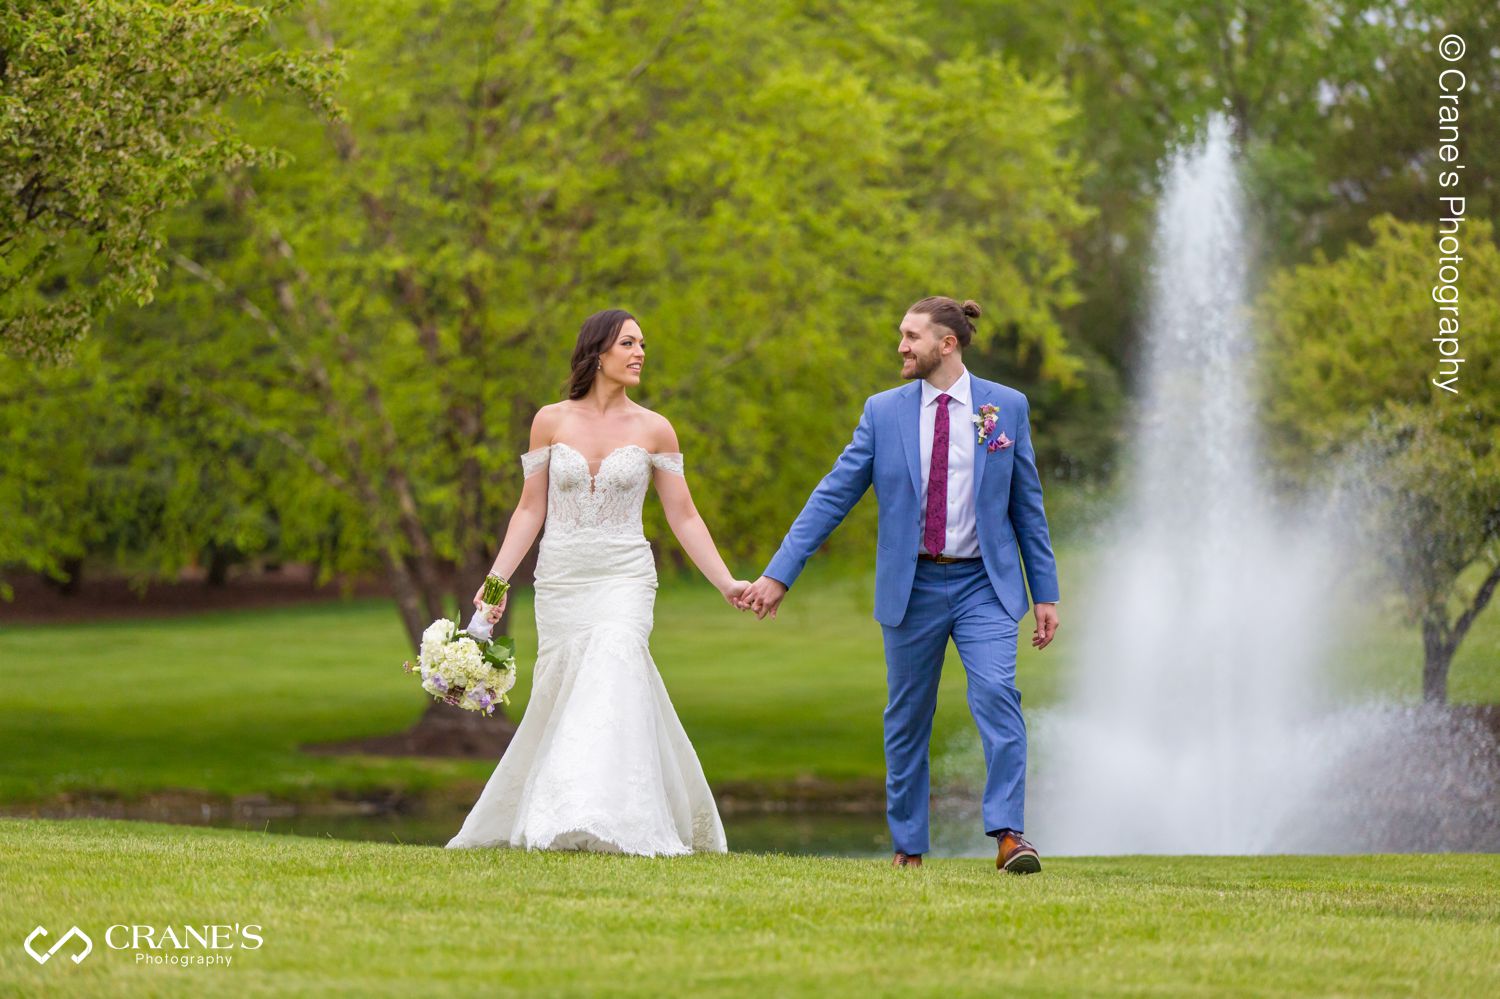 A photo of a bride and groom walking hand in hand with a beautiful fountain in the background